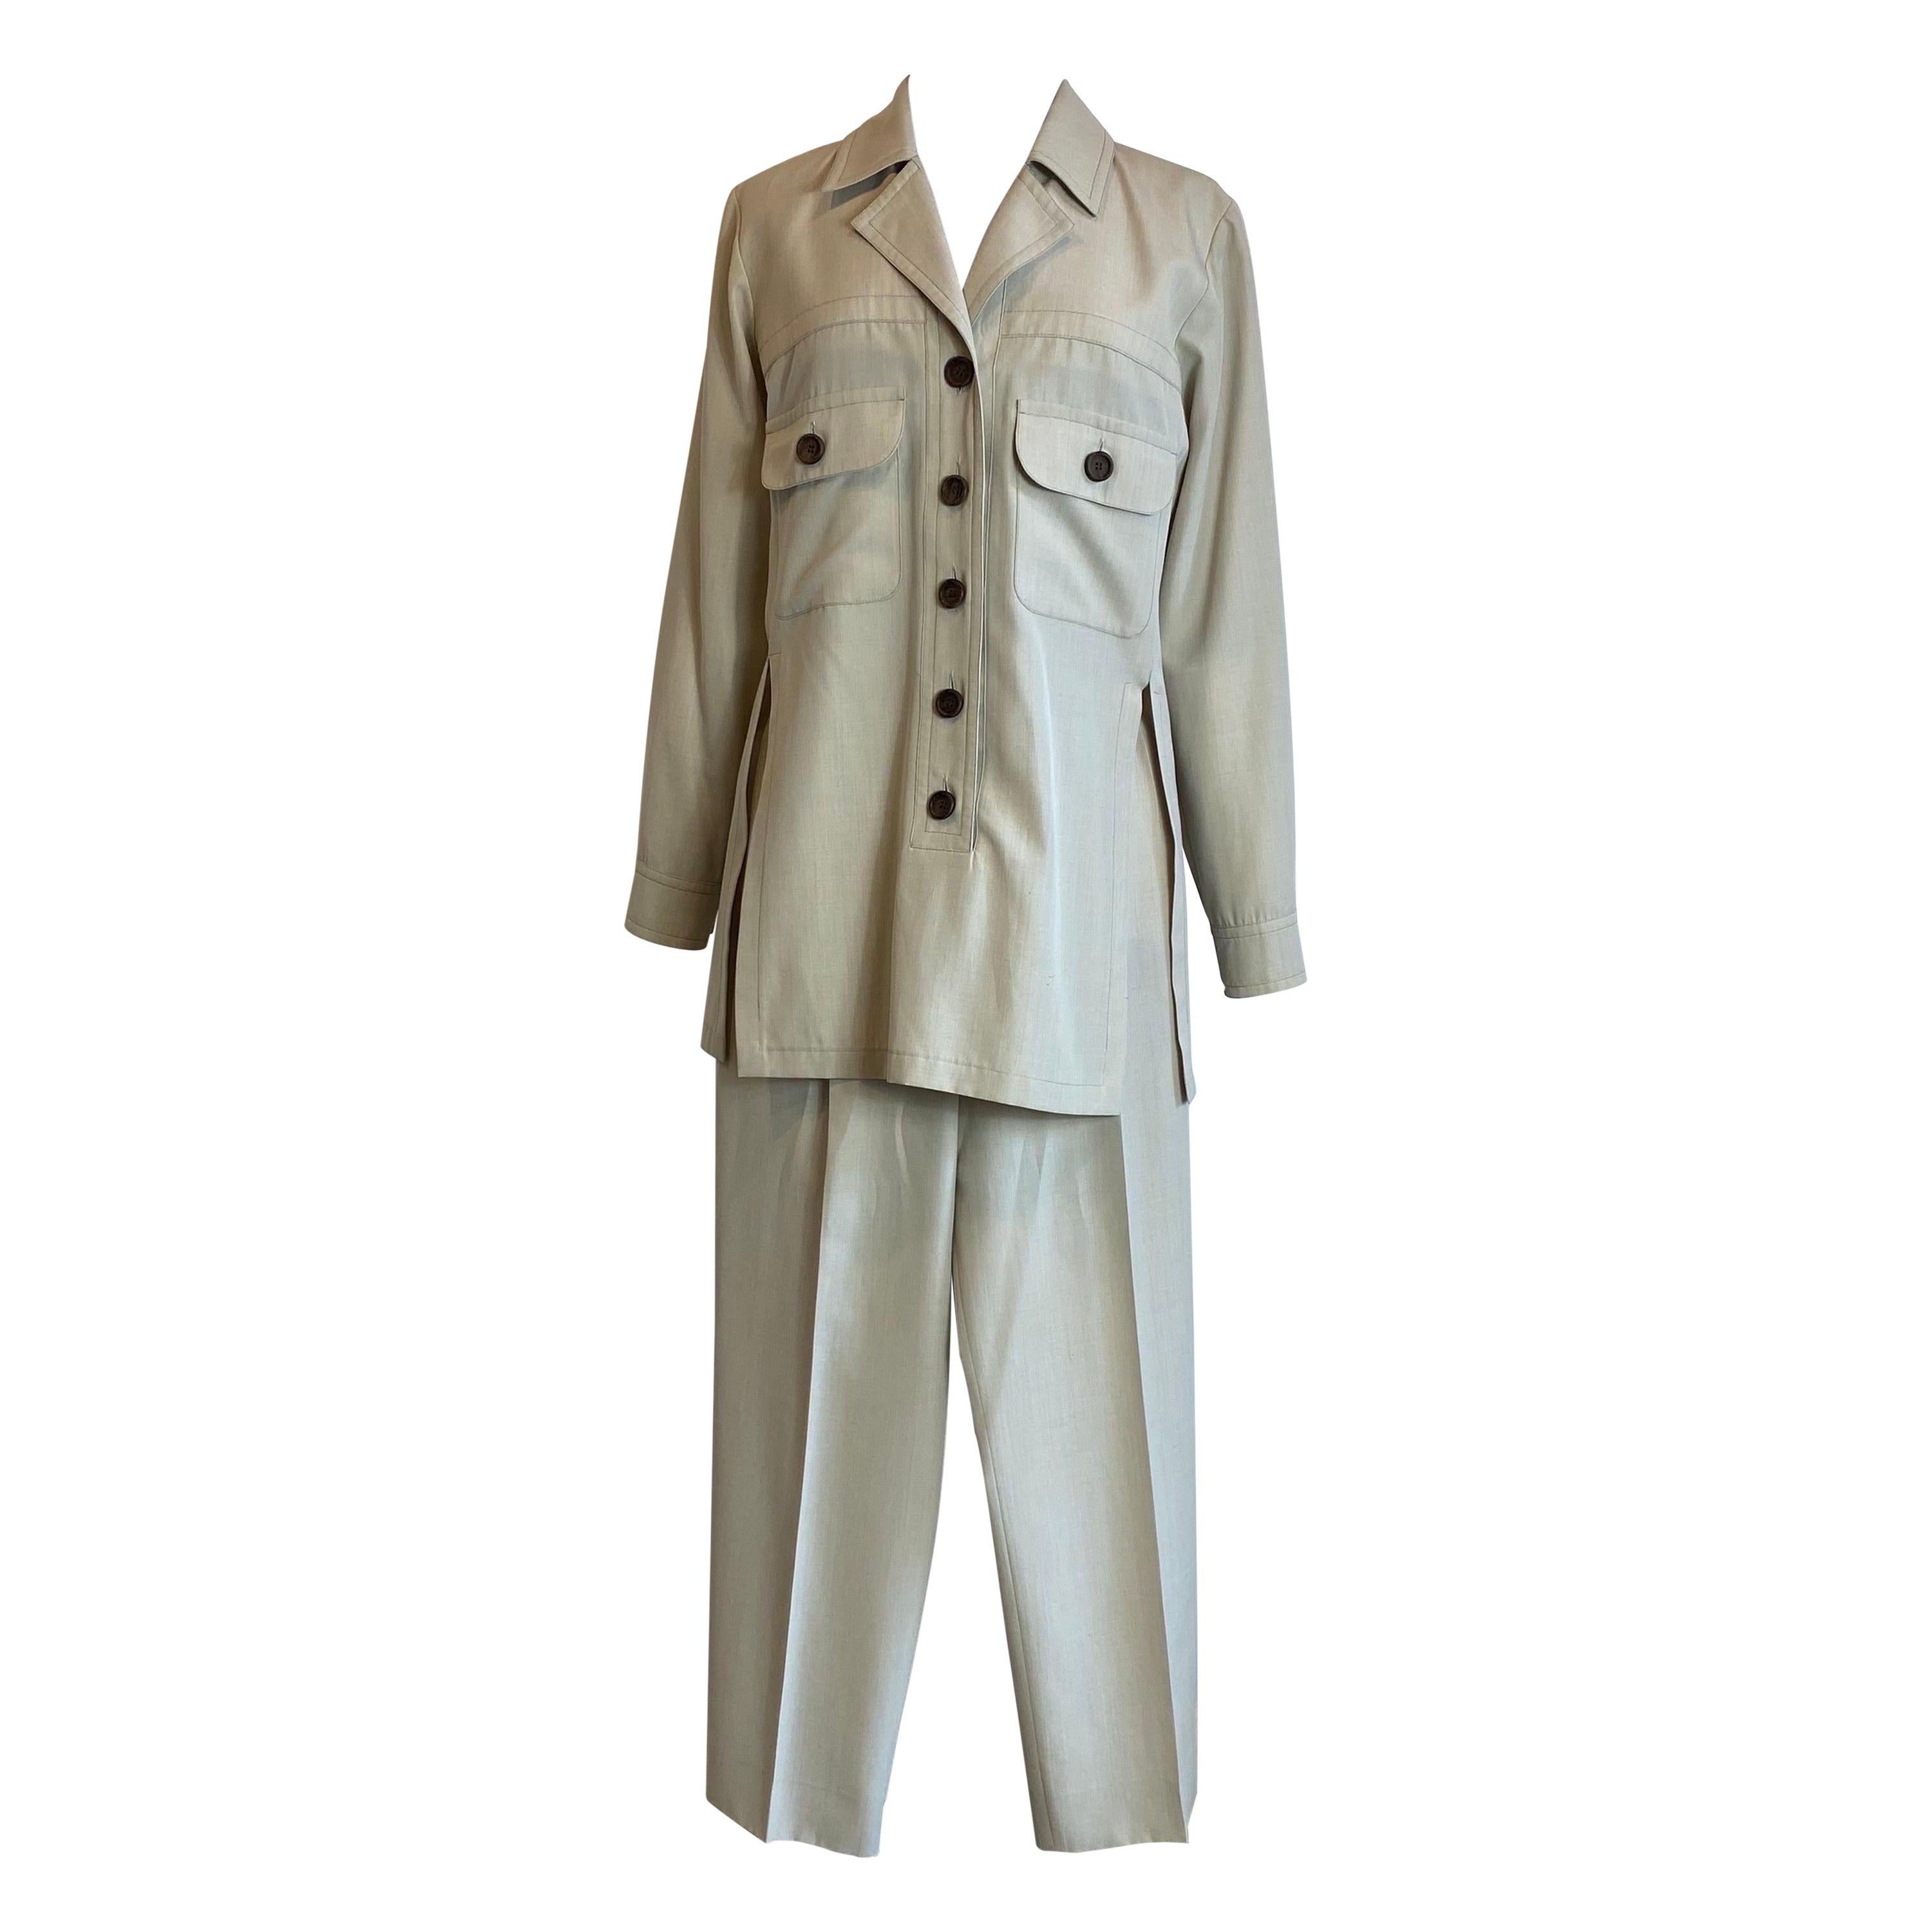 Yves Saint Laurent Variation iconic Sahariana Blouse and Pants Suit For Sale